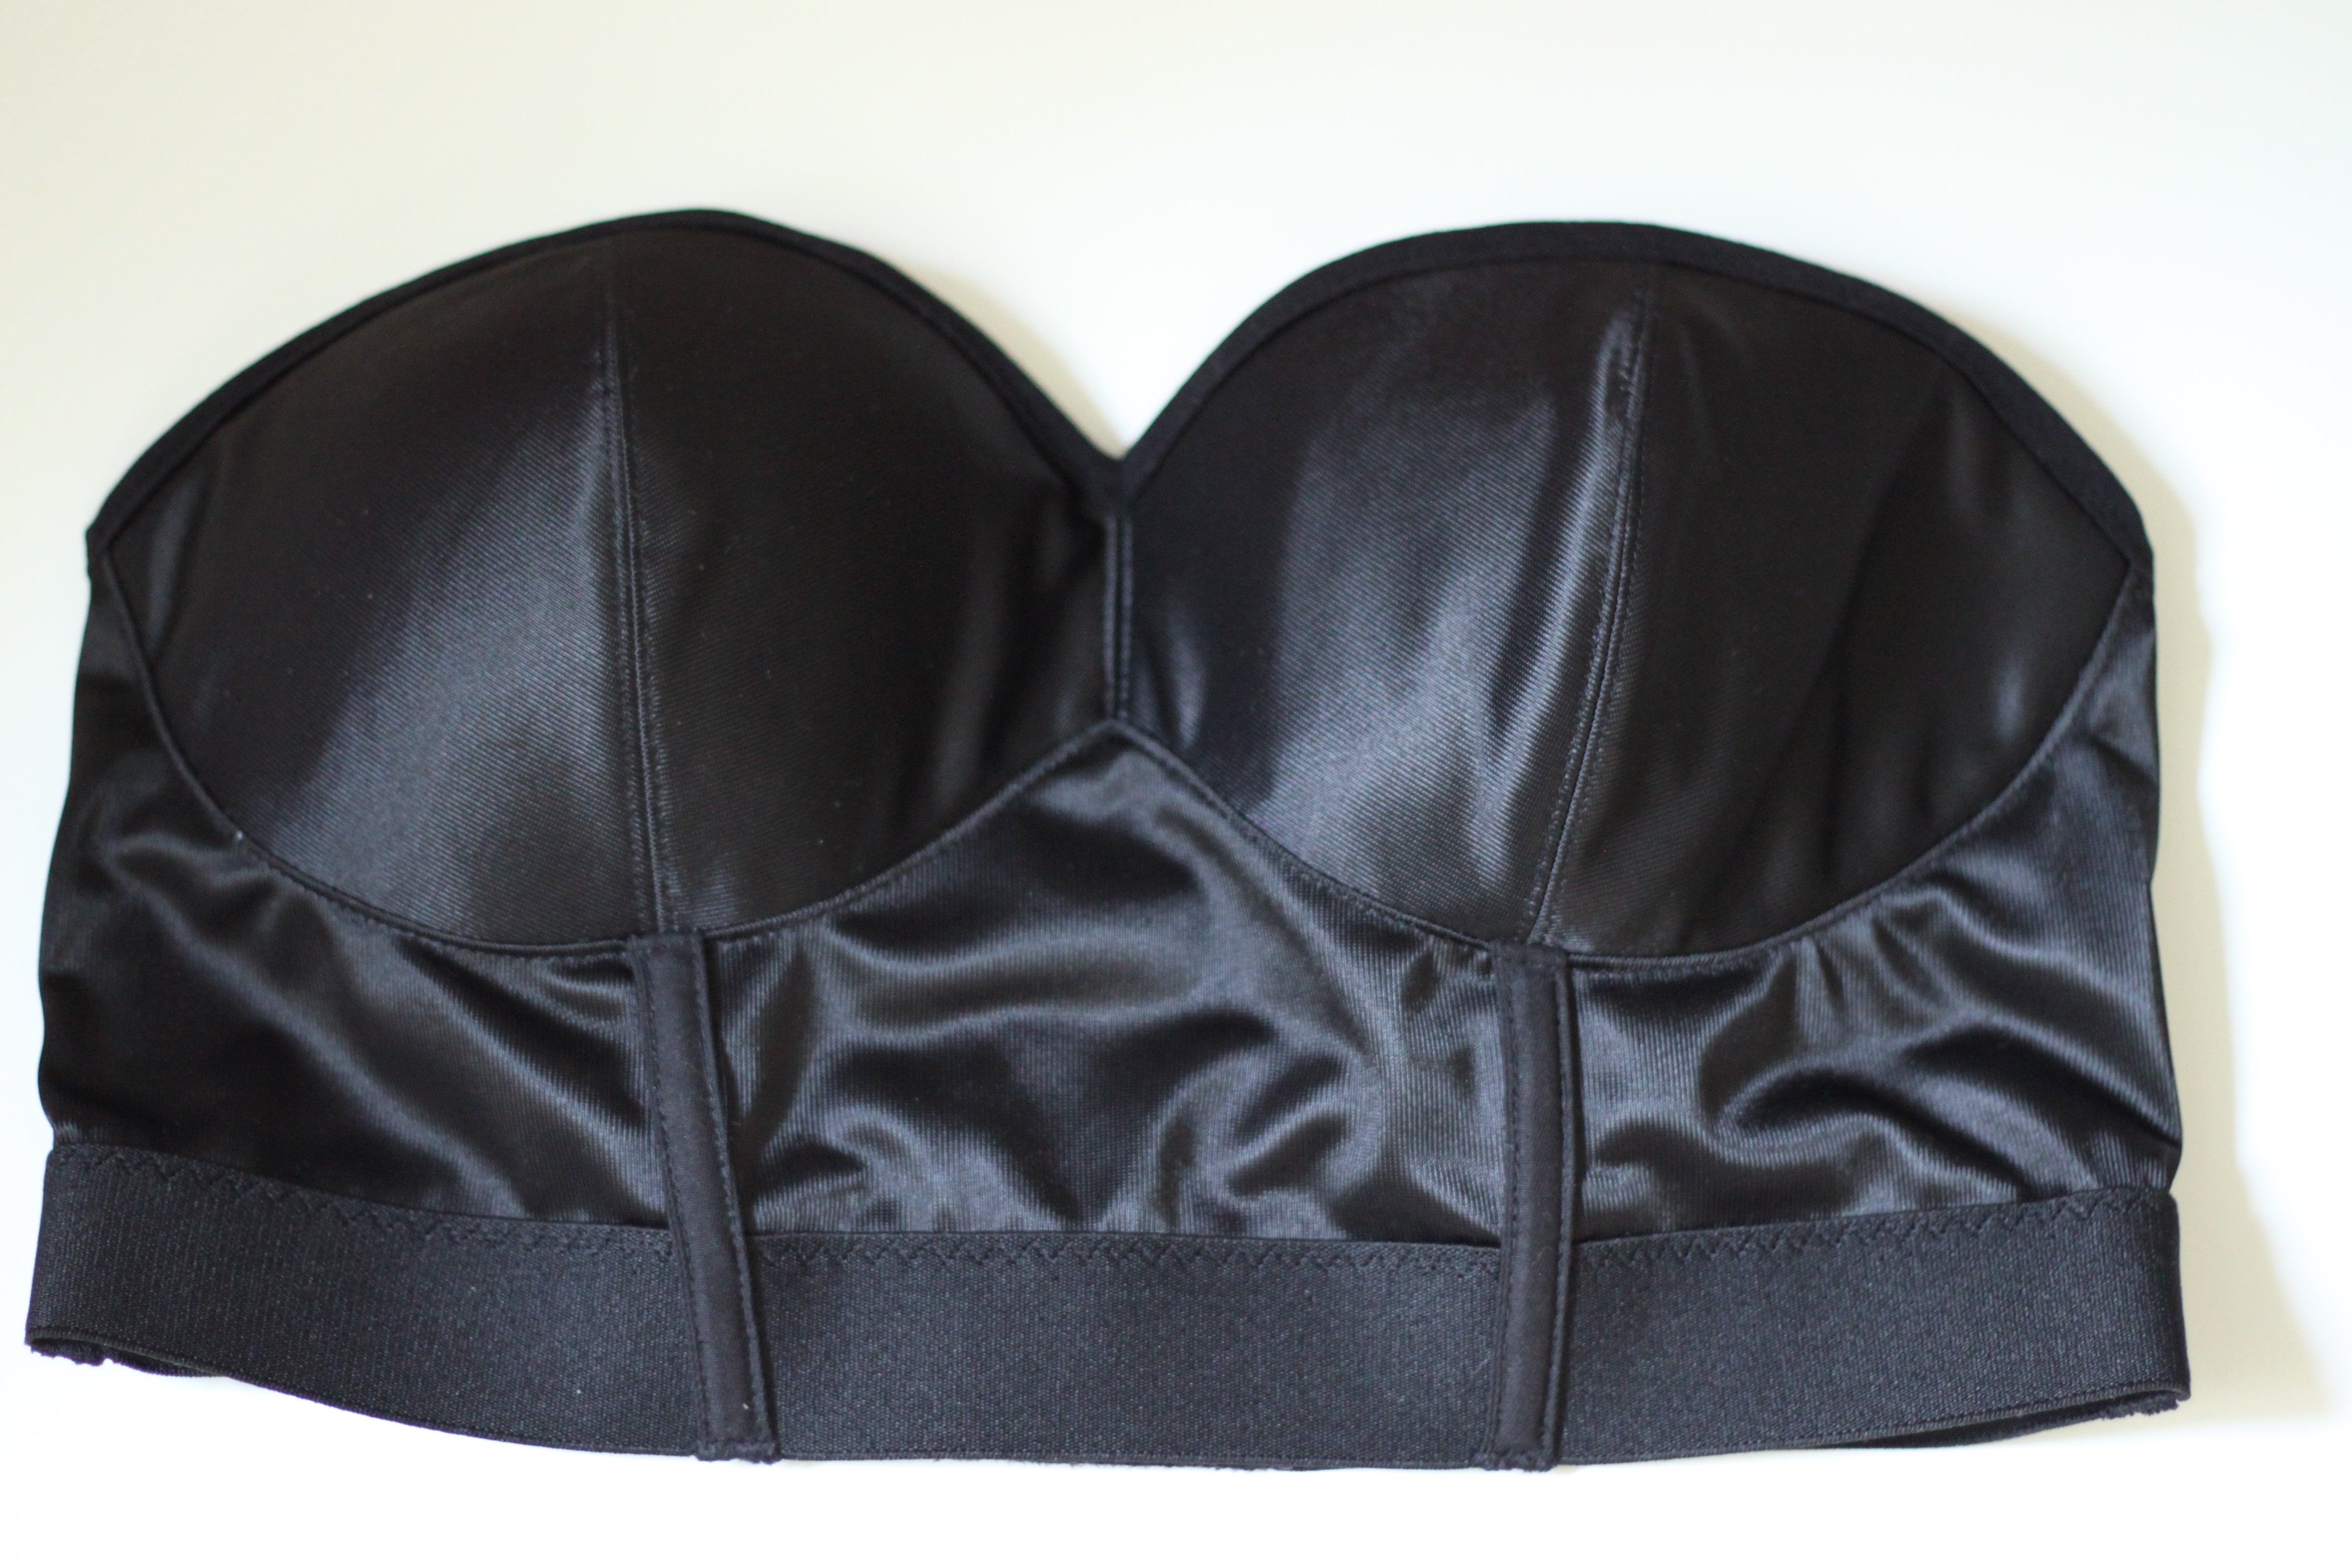 Custom made strapless bras and bustiers